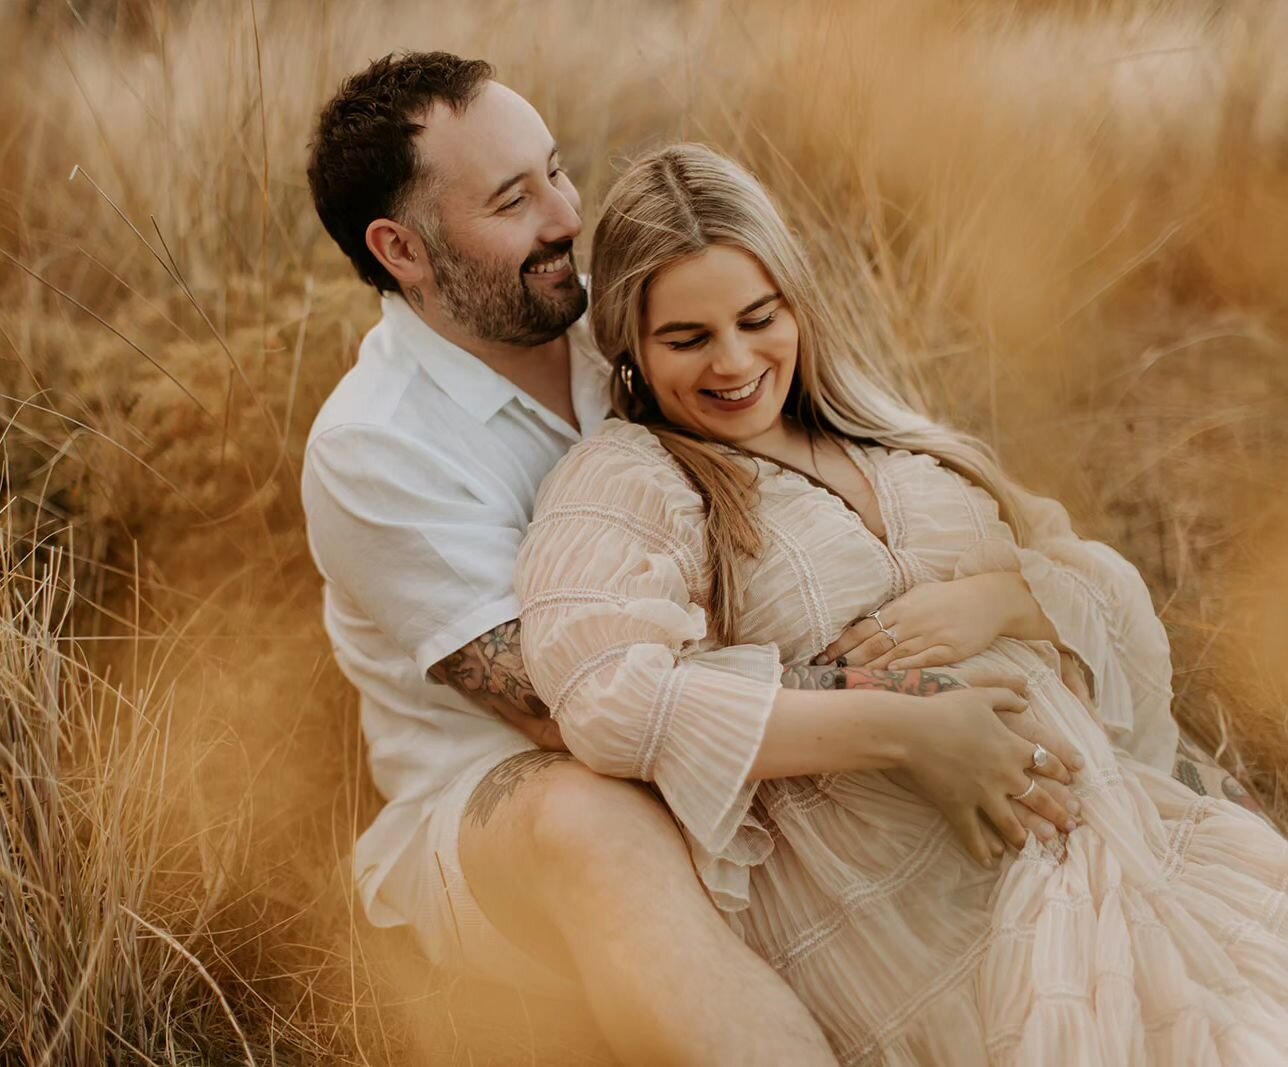 What an absolute cracker of a evening on father's day for this special couple whom are just so very excited to bring into the world their new addition soon to add all of the joy imaginable. 

So many beautiful images I can share from this session but